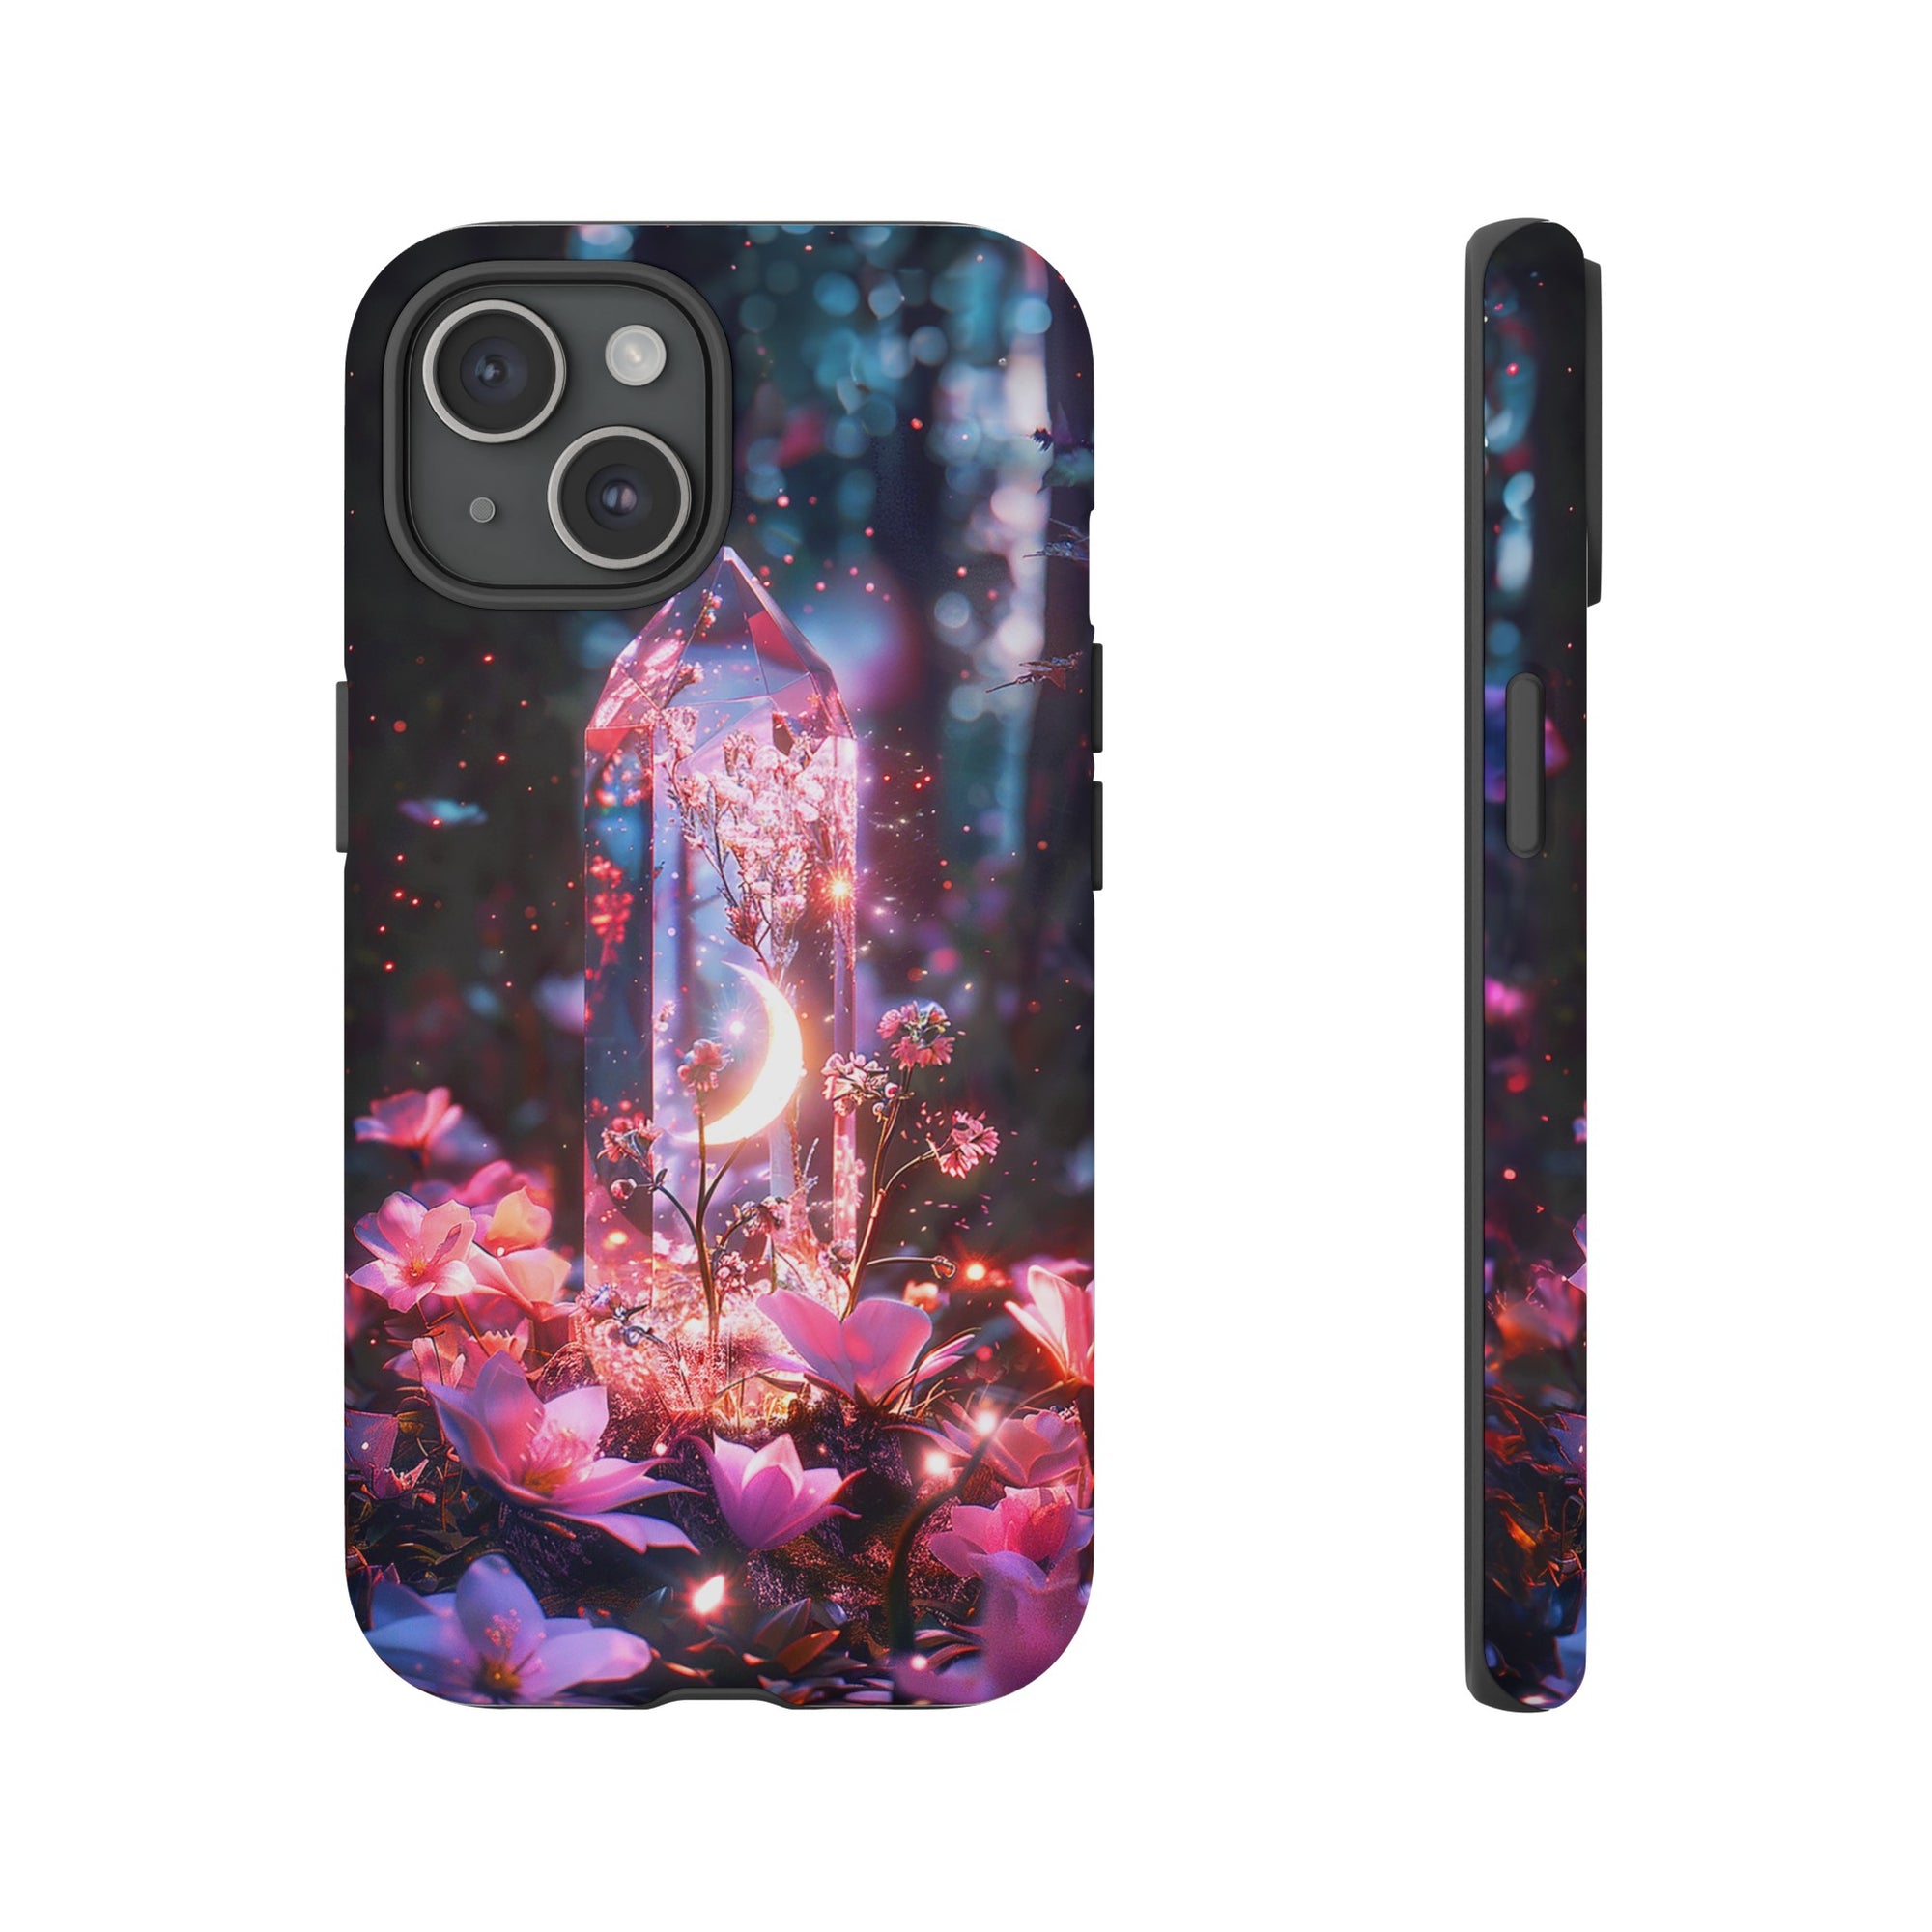 Crystal Magick iPhone Case